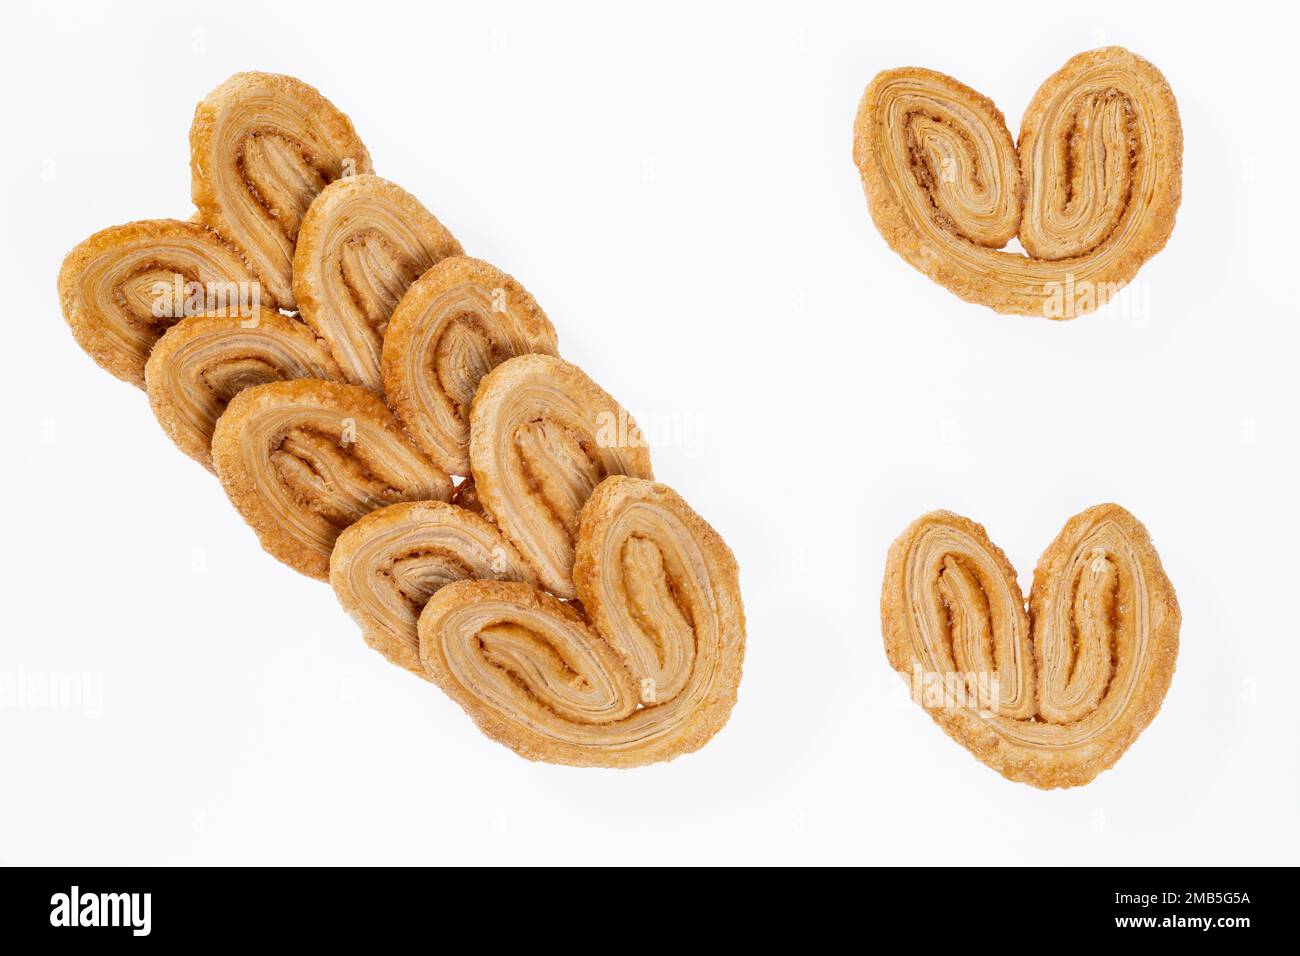 Bakery And Pastry - Tasty Puff Pastry Hearts Covered With Sugar; Photo  White Background Stock Photo - Alamy